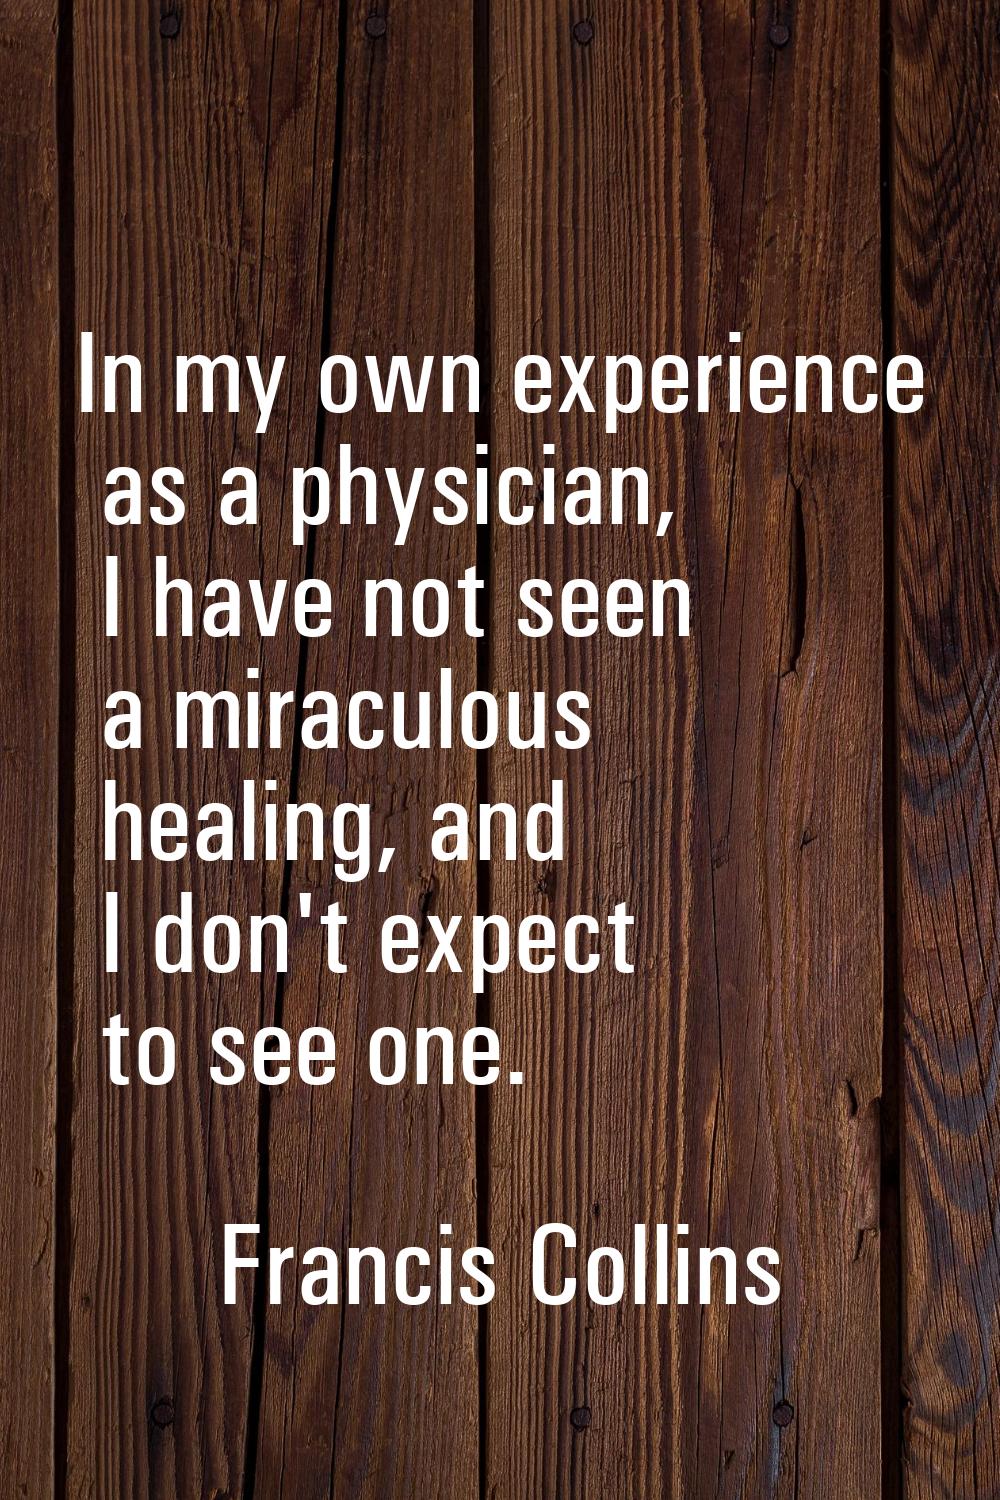 In my own experience as a physician, I have not seen a miraculous healing, and I don't expect to se